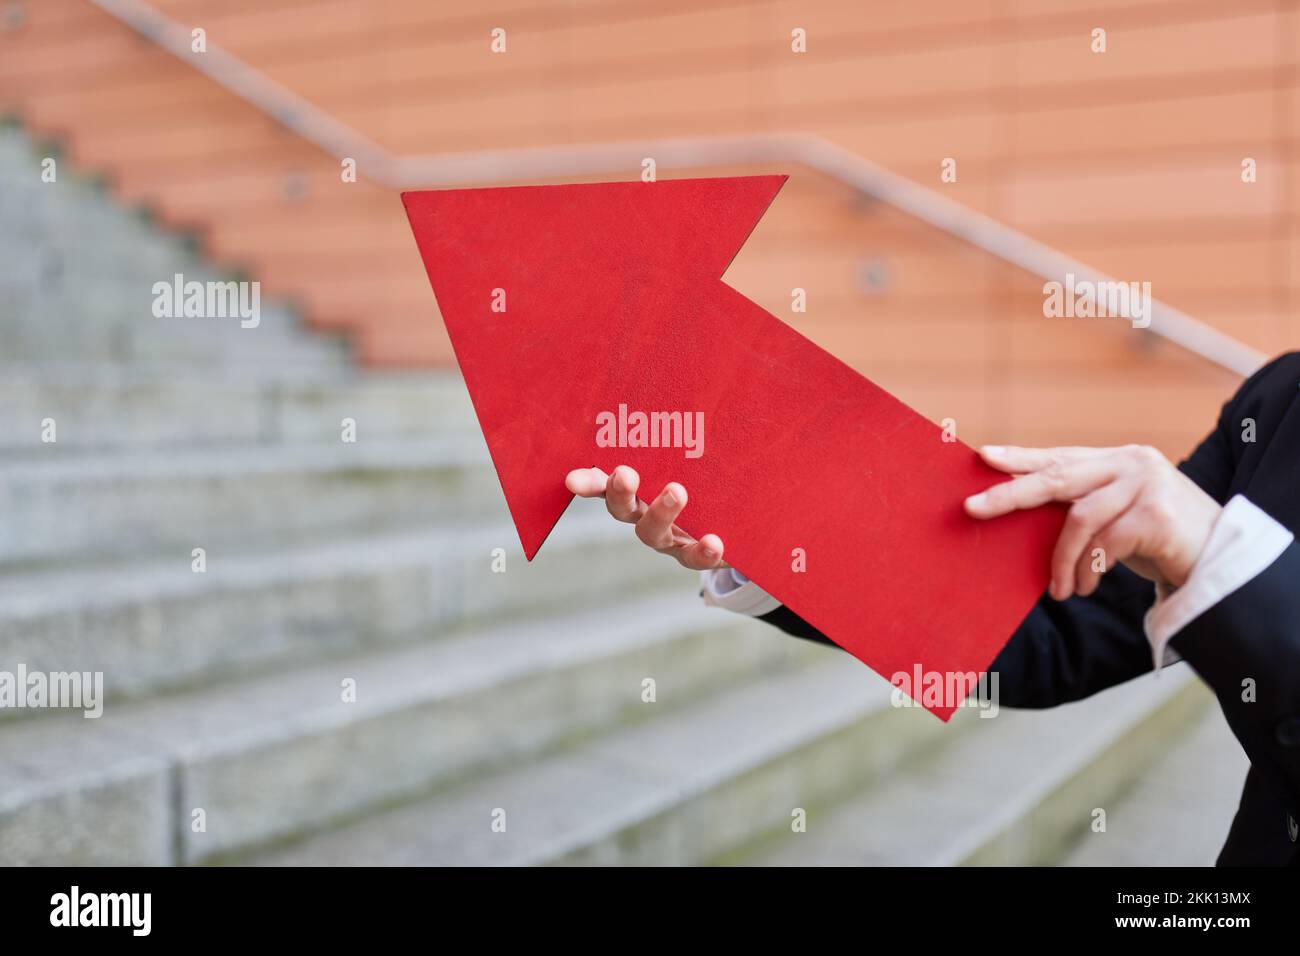 Businesswoman holding ted arrow sign as growth and innovation concept symbol Stock Photo